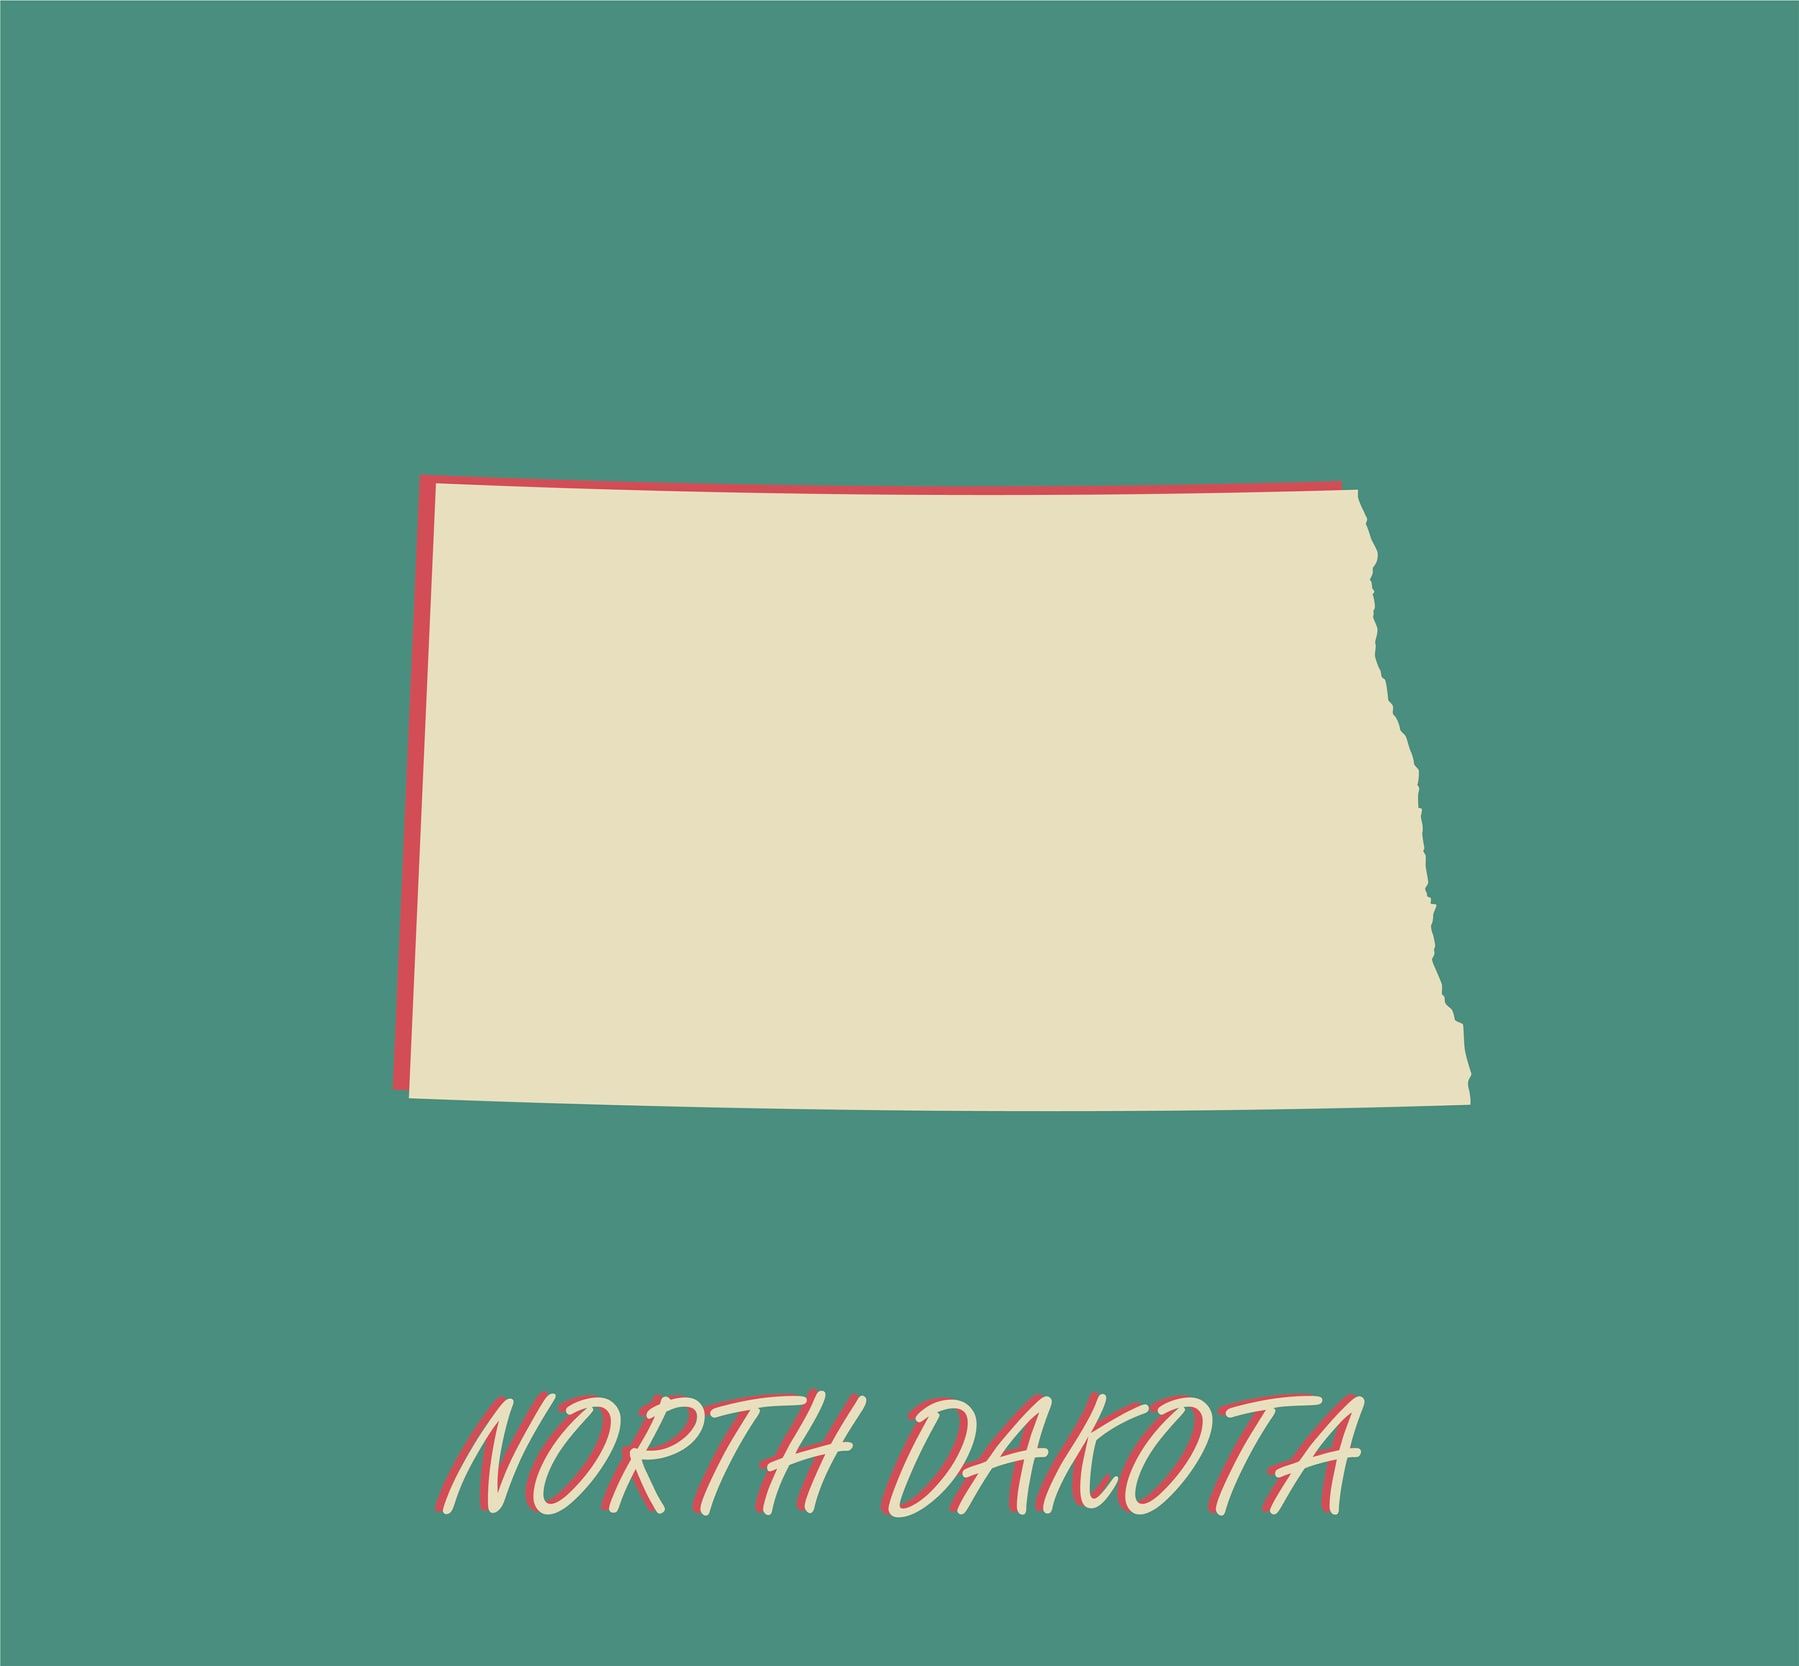 North Dakota household employment tax and labor law guide